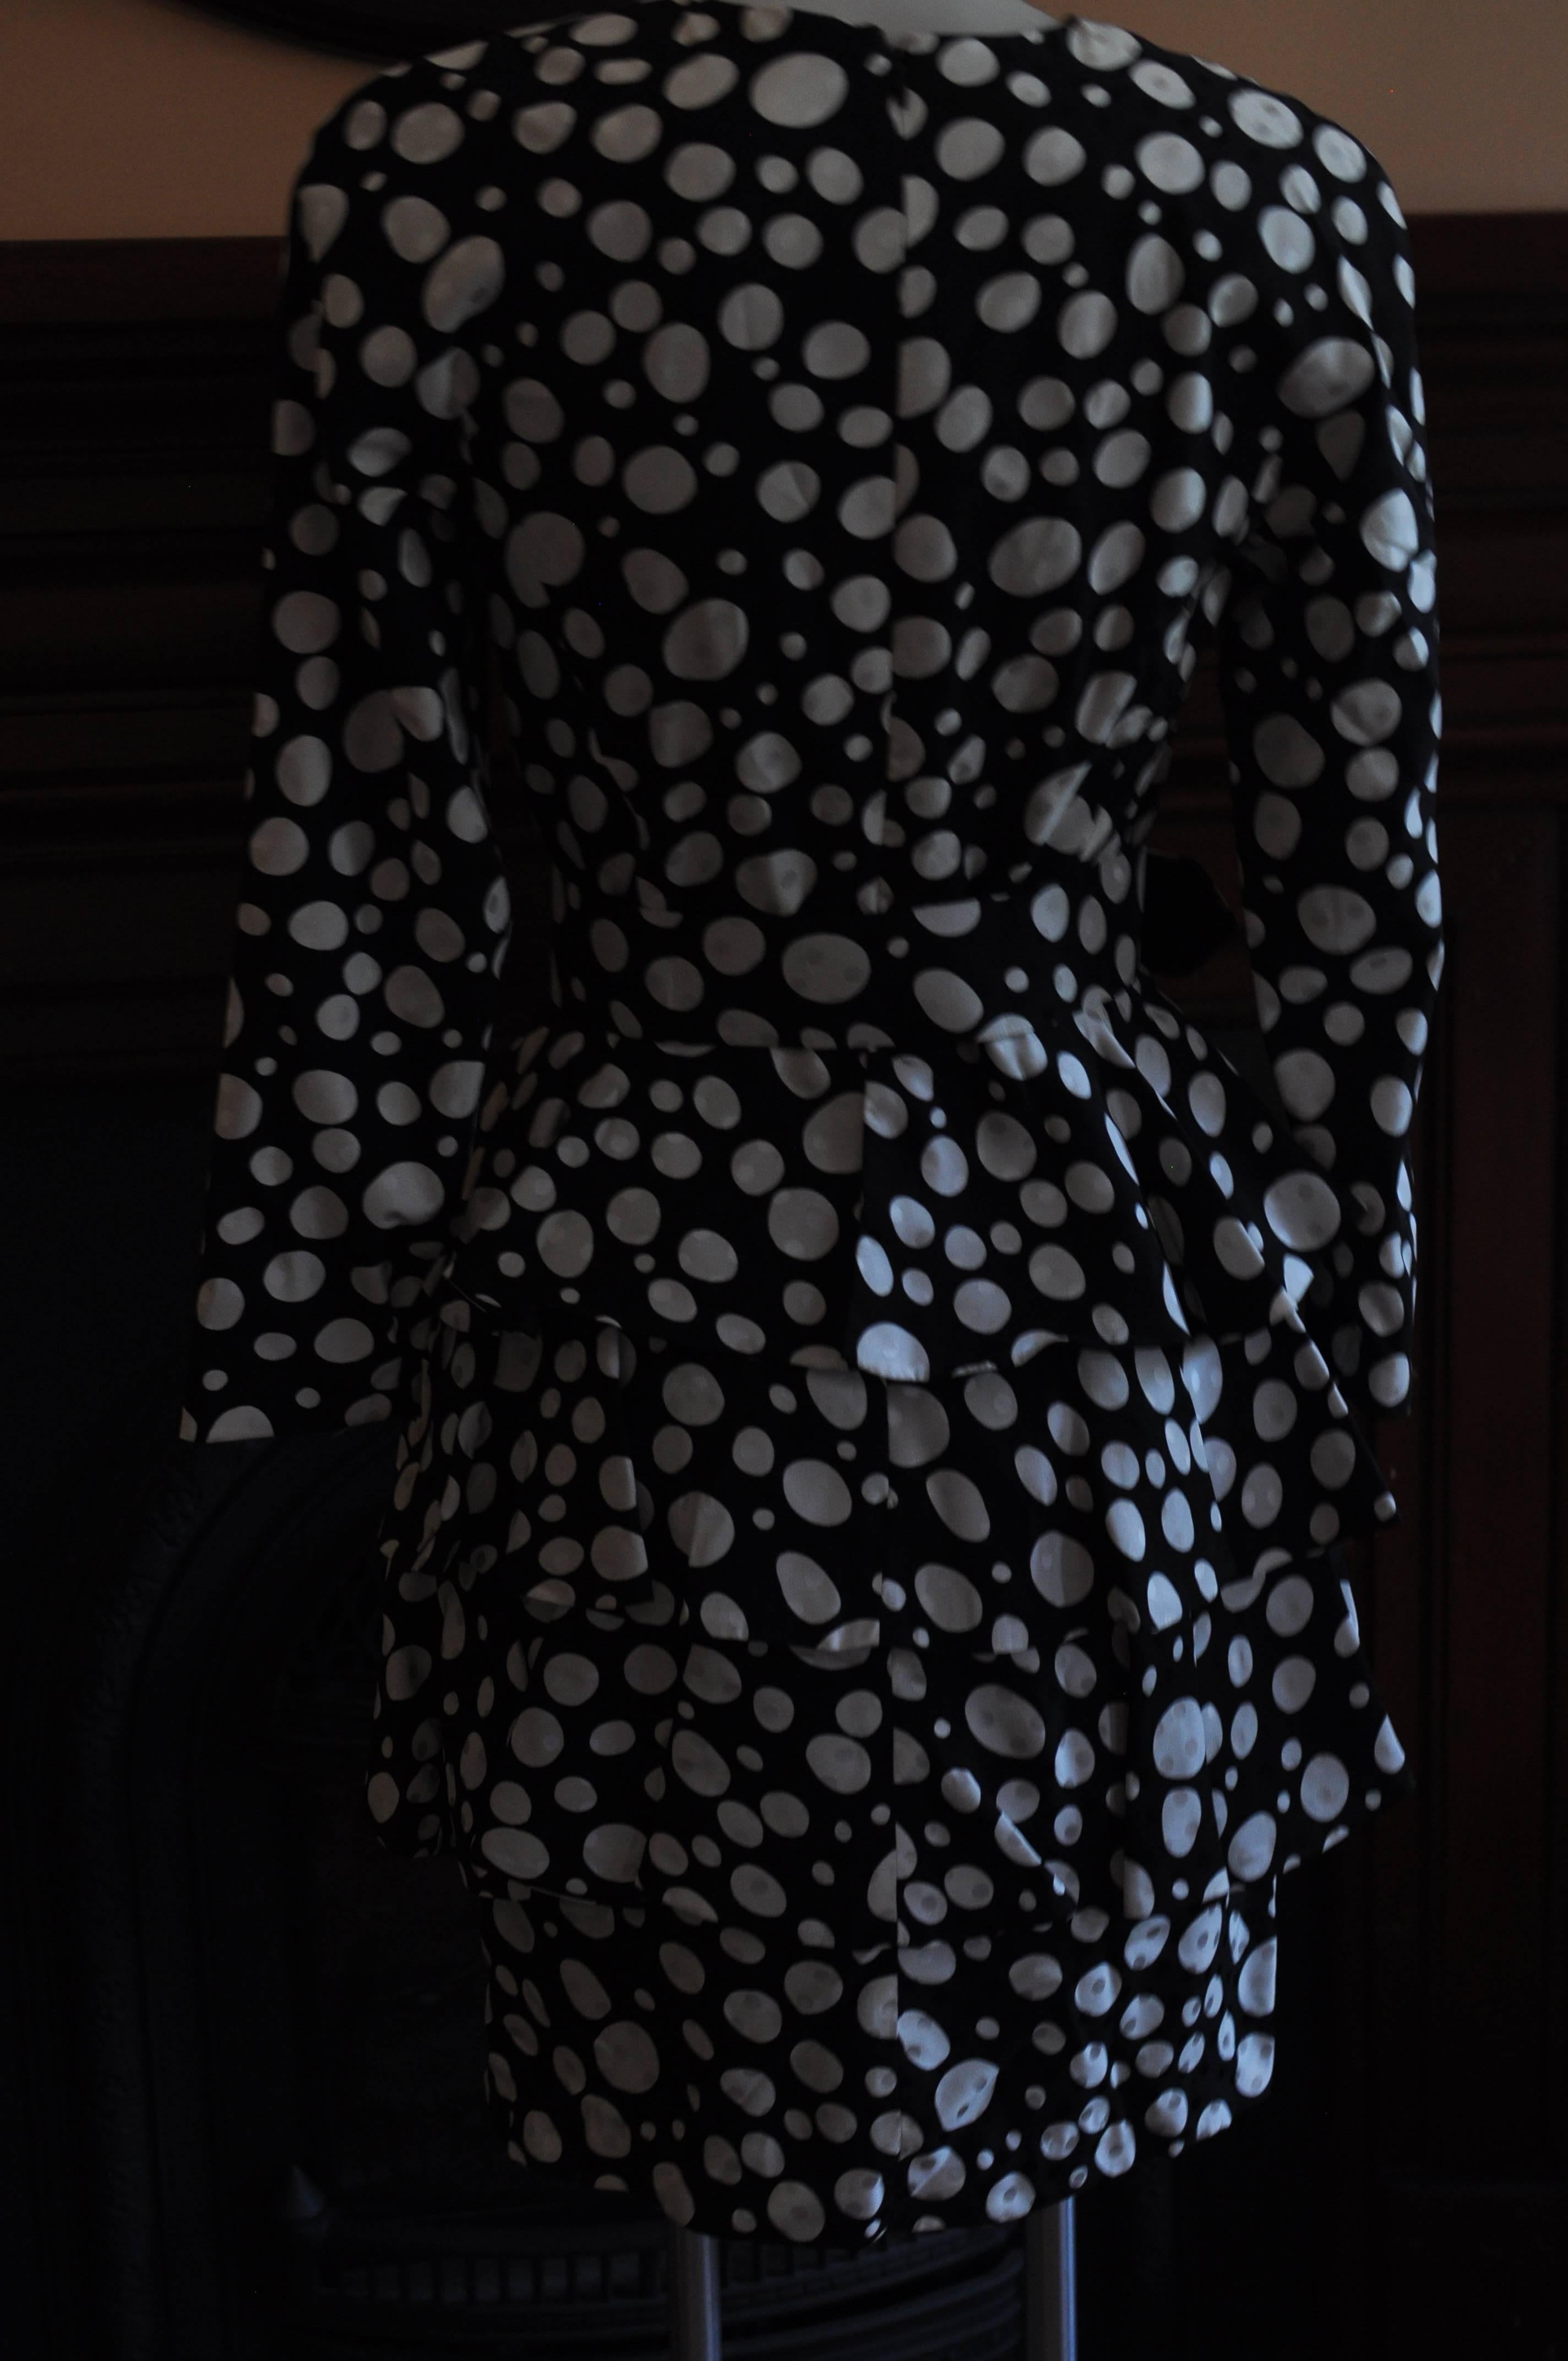 Perfect cocktail dress! This Arnold Scaasi silk dress is tiered; has a round collar; a wide belt and a polka dot pattern of different sizes which also superimposed.